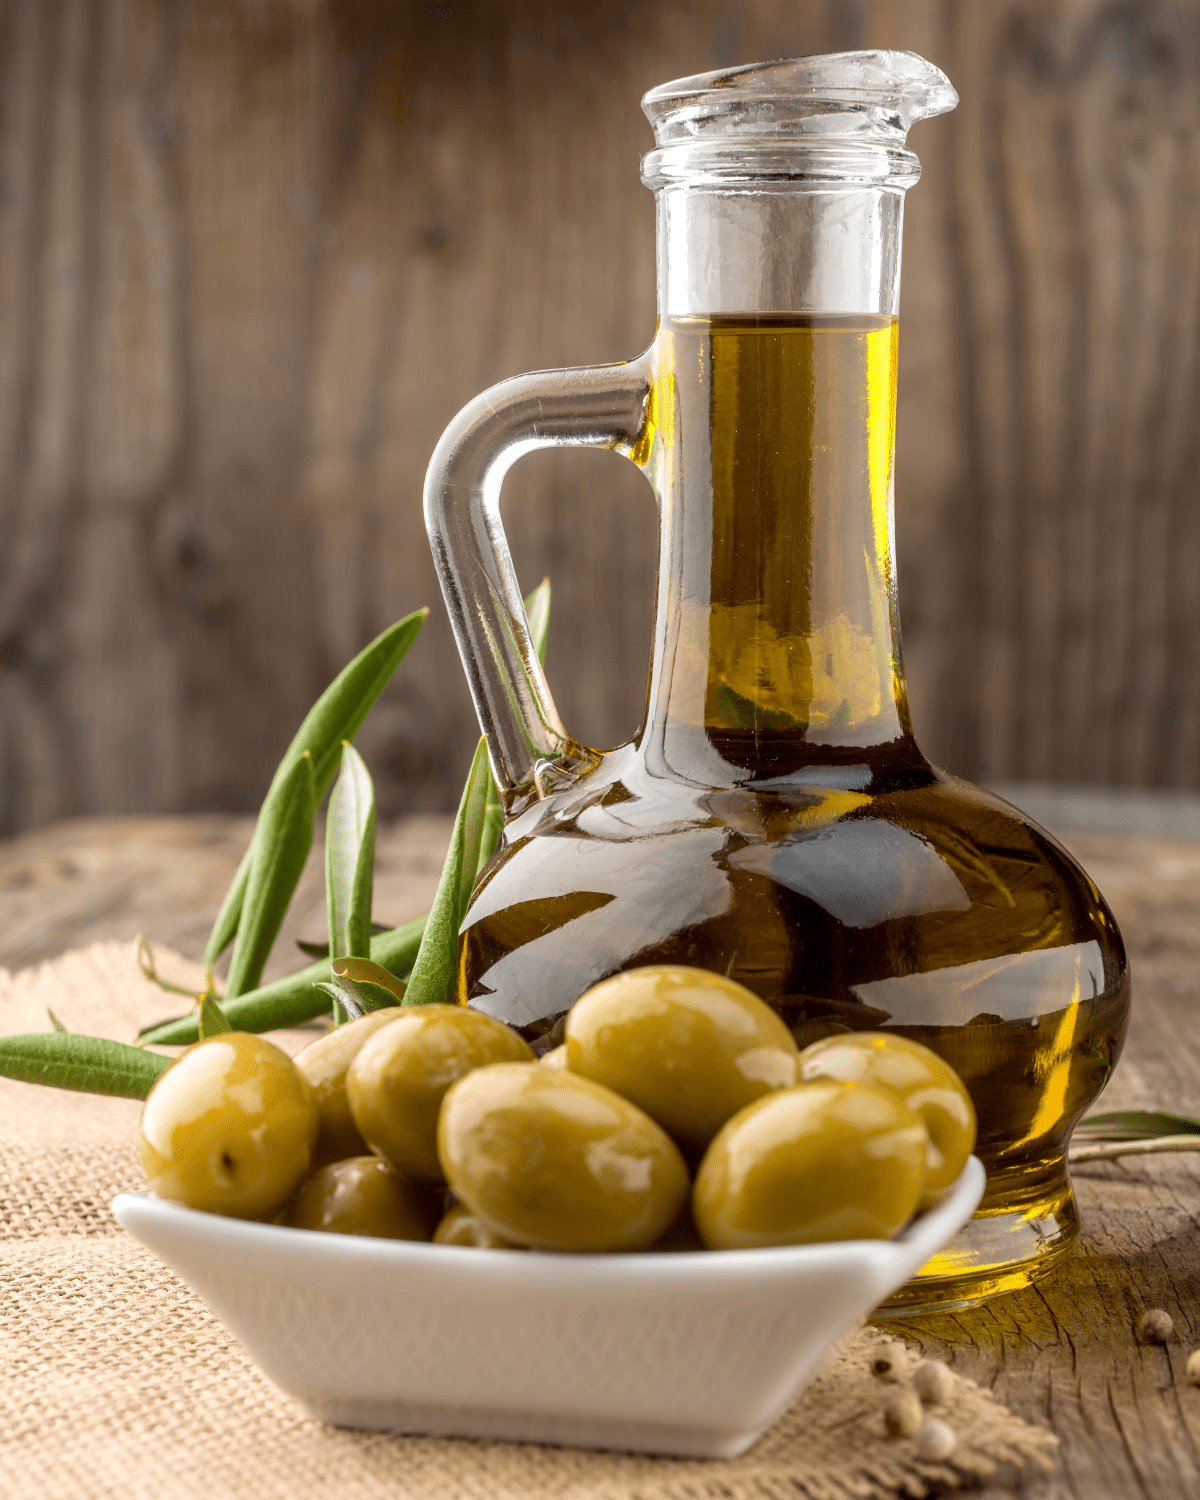 Glass bottle of olive oil behind a small bowl of green olives.